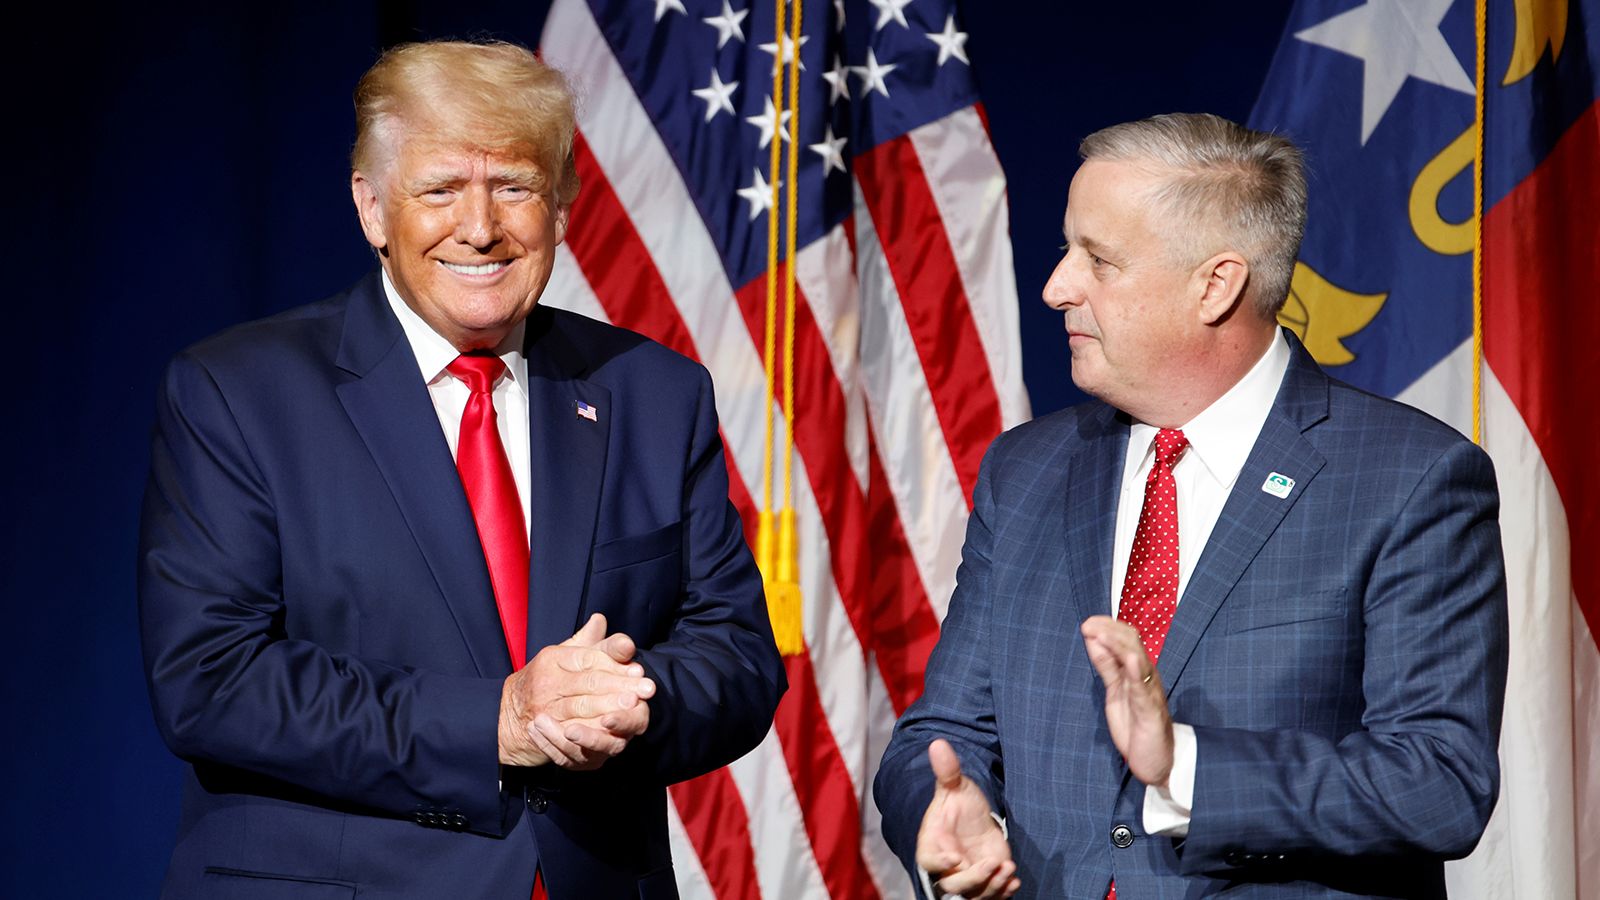 Former President Donald Trump is introduced by North Carolina Republican Party Chairman Michael Whatley before speaking at the North Carolina GOP convention dinner in Greenville, North Carolina, June 5, 2021.